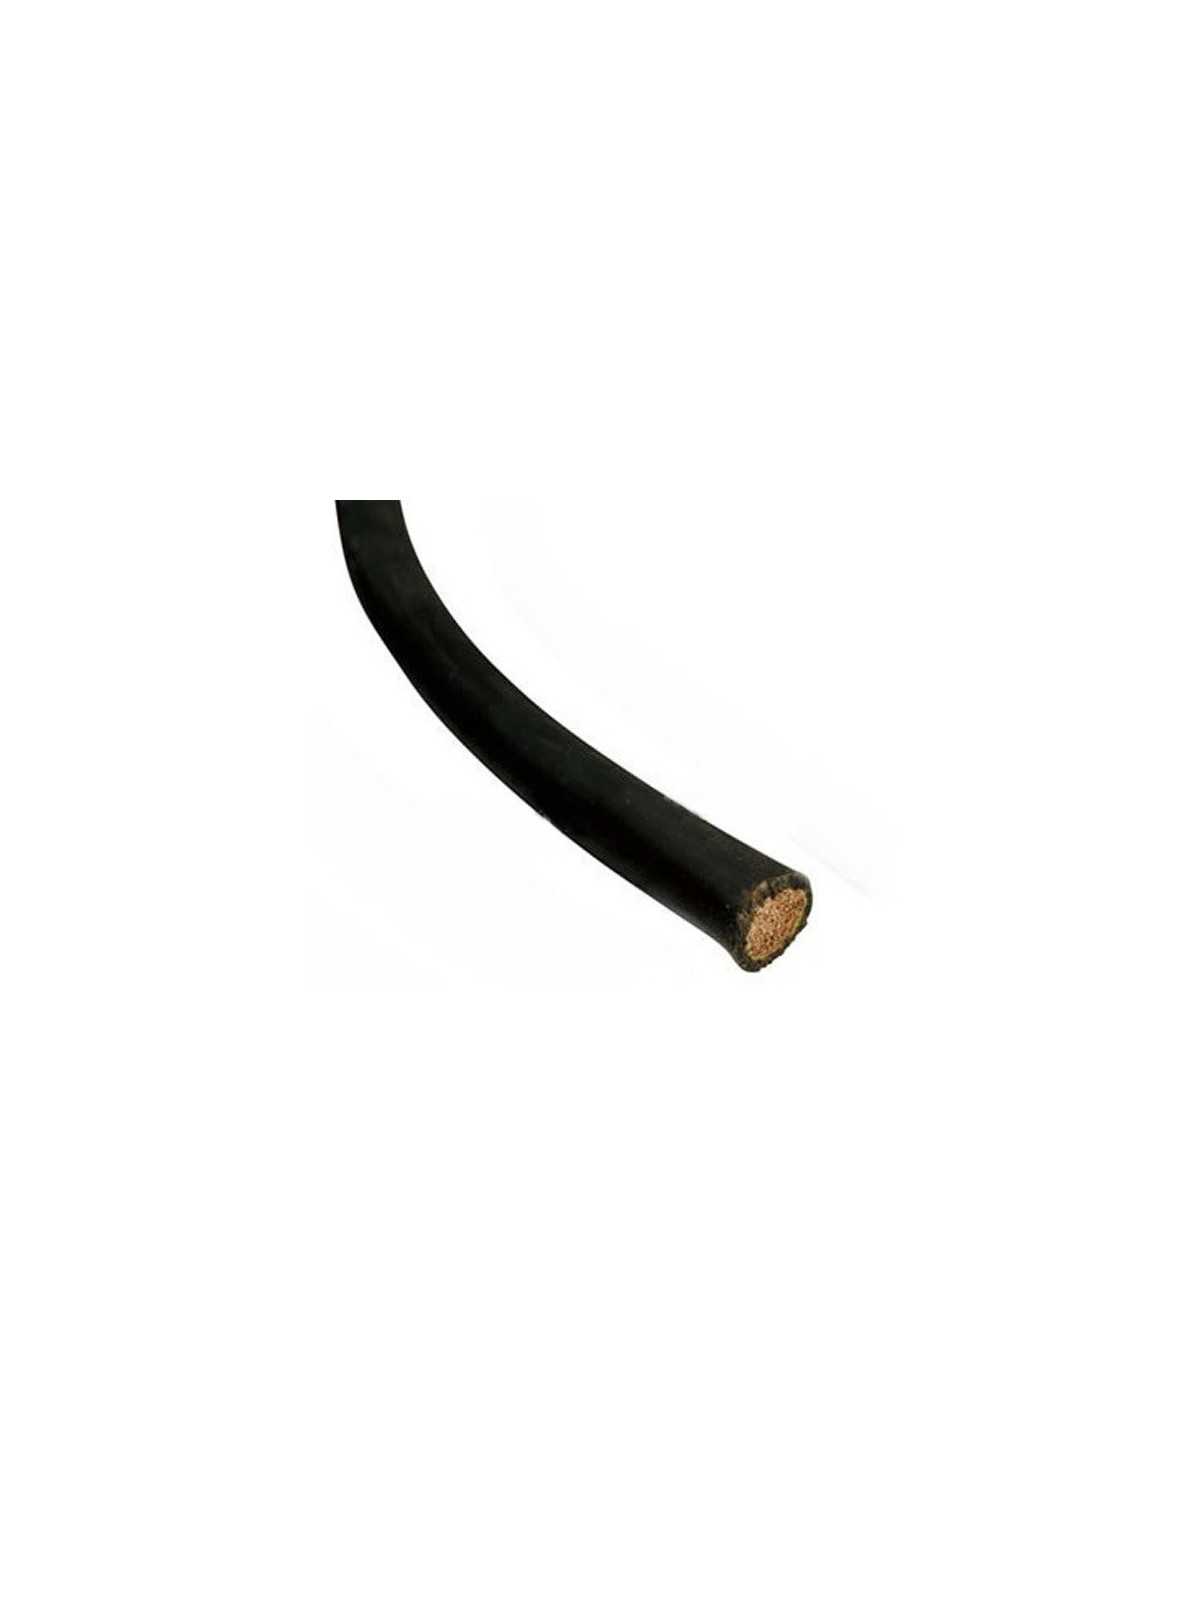 Cable 1x50mm2 - 1m